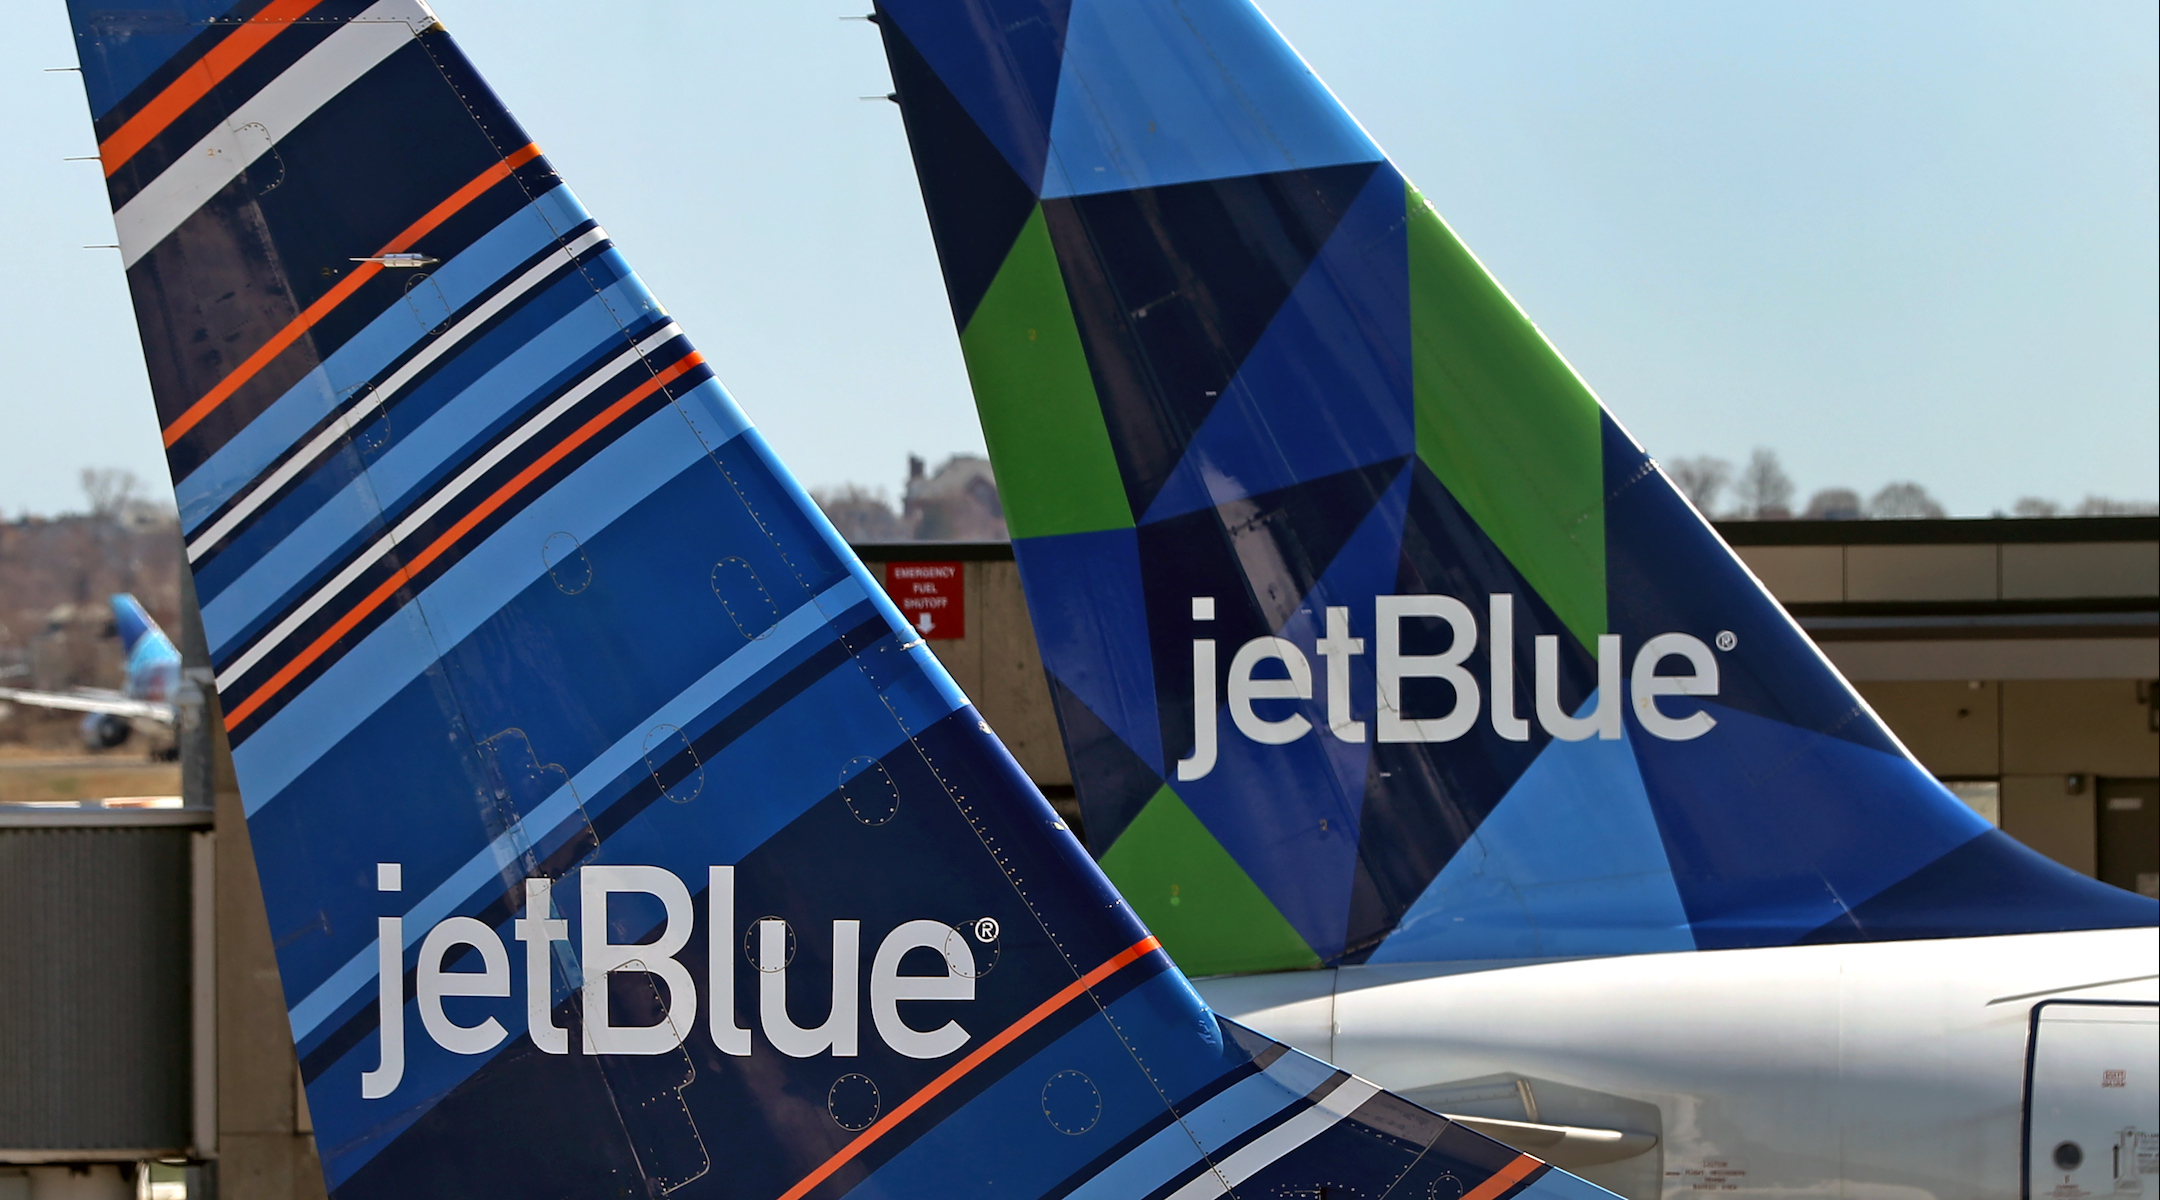 Kof-K sued JetBlue for allegedly selling a food product with their kosher certification symbol. (Getty Images)